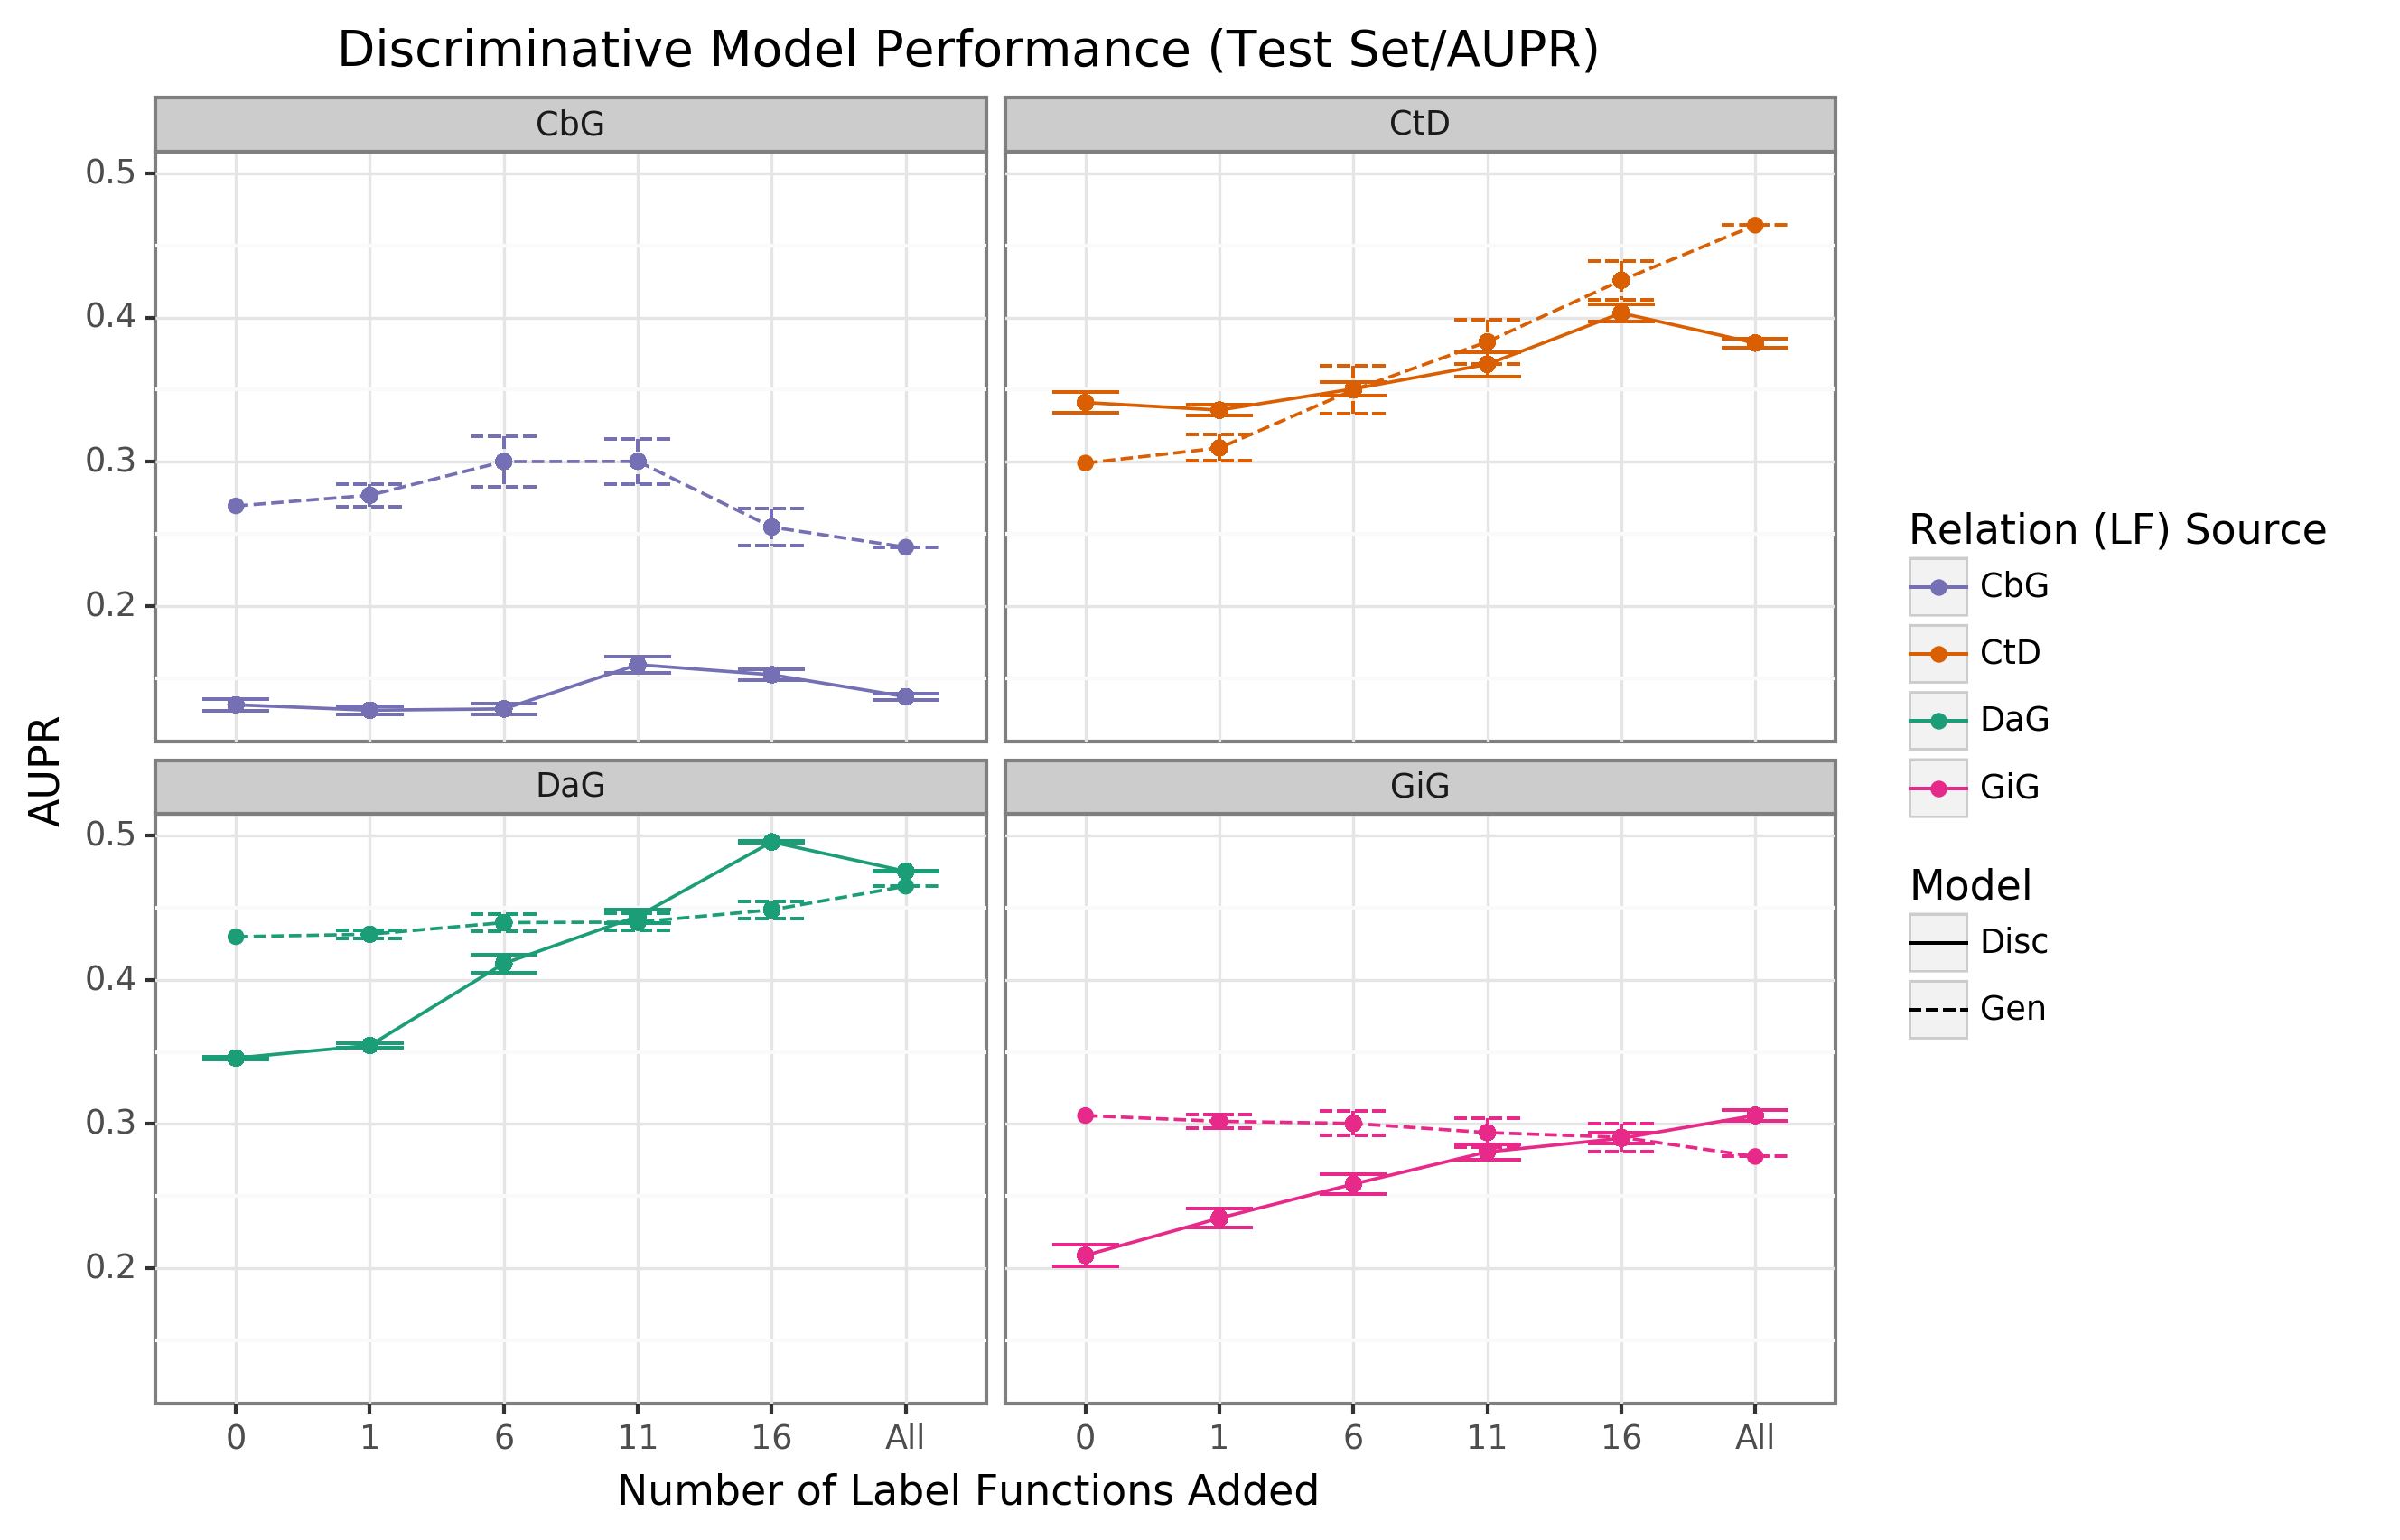 Figure 8: The discriminator model improves performance as the number of edge-specific label functions is added to the baseline model. The line plot headers represent the specific edge type the discriminator model is trying to predict. The x-axis shows the number of randomly sampled label functions incorporated as an addition to the baseline model (the point at 0). The y axis shows the area under the precision-recall curve (AUPR). Each data point represents the average of 3 sample runs for the discriminator model and 50 sample runs for the generative model. The error bars represent each run’s 95% confidence interval. The baseline and “All” data points consist of sampling from the entire fixed set of label functions.